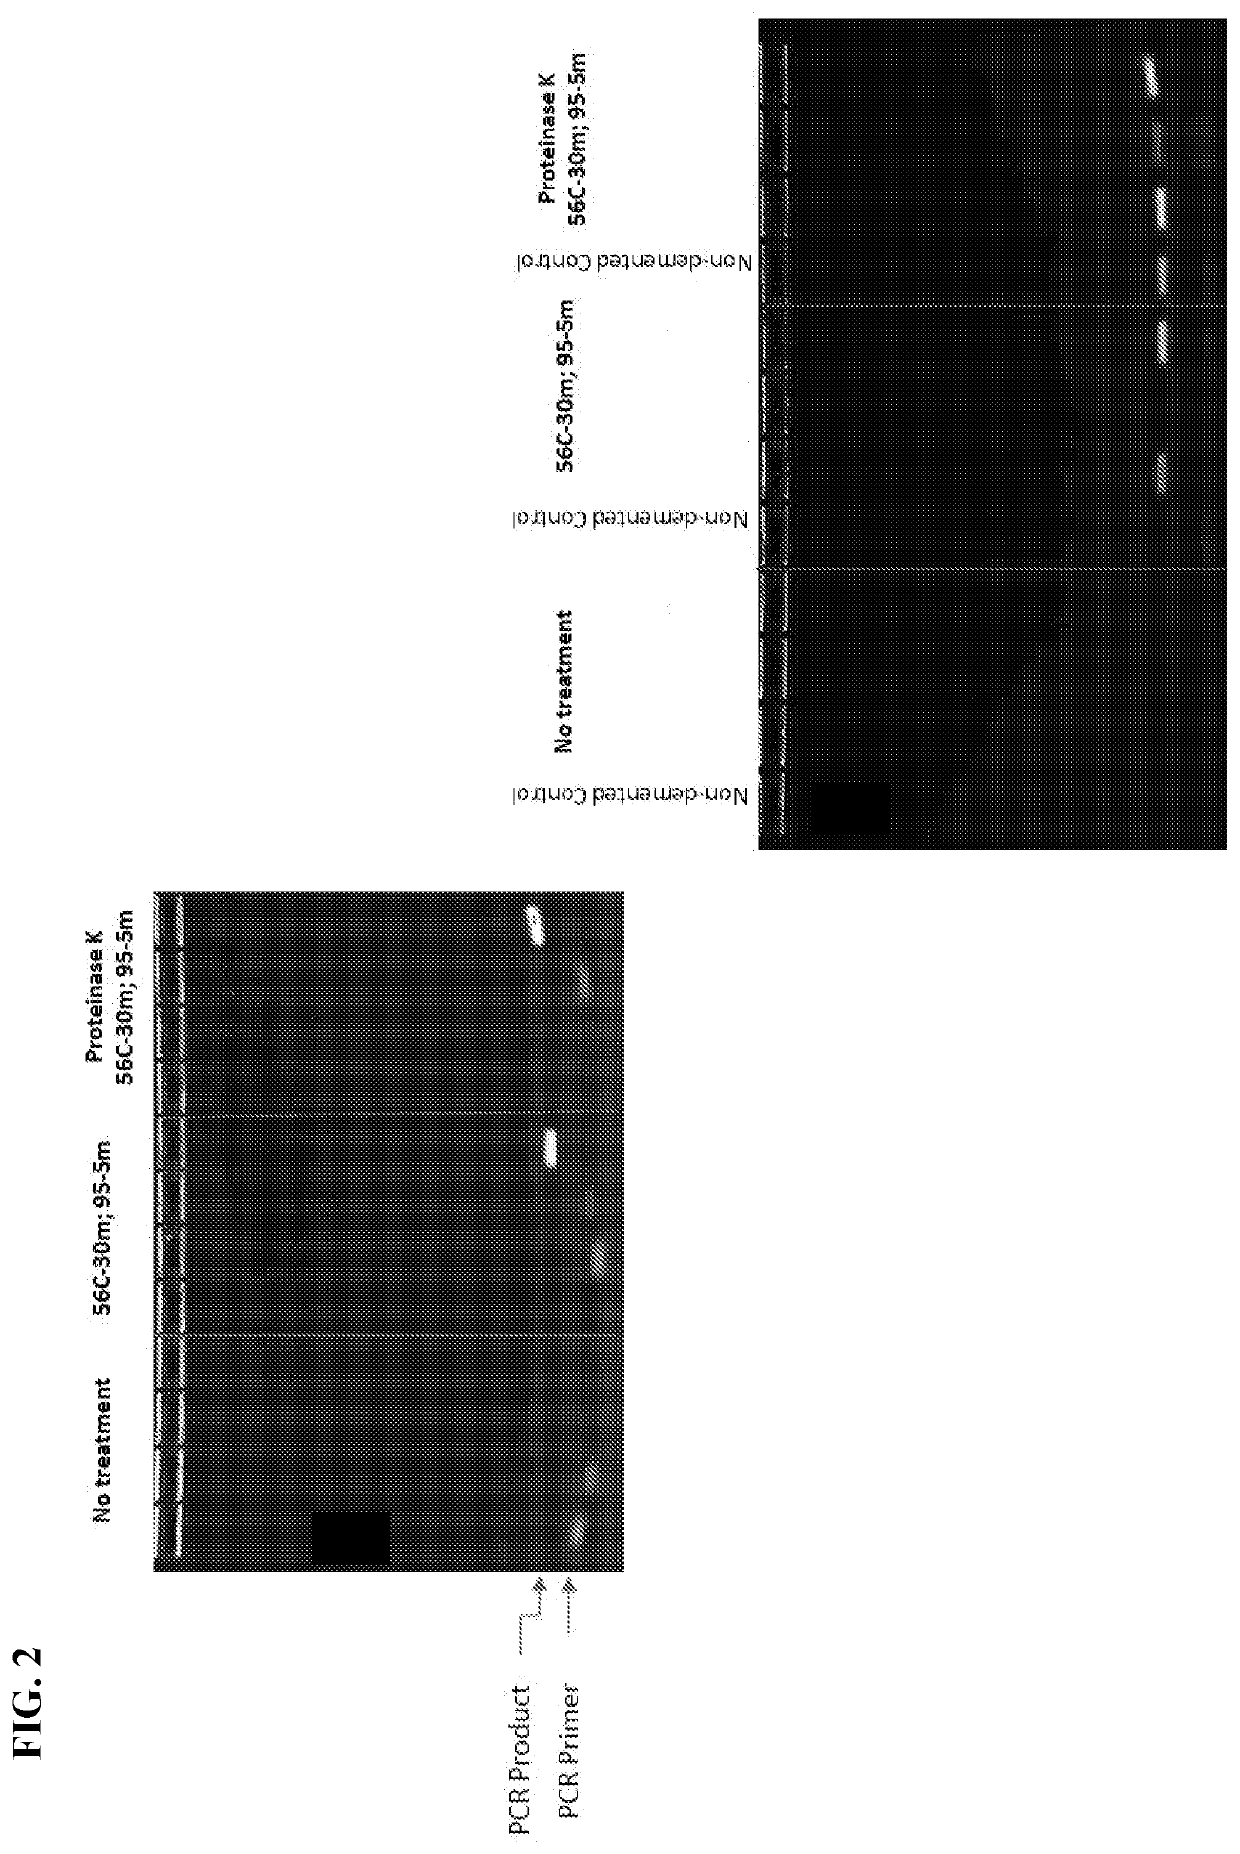 Methods for detection of microbial nucleic acids in body fluids